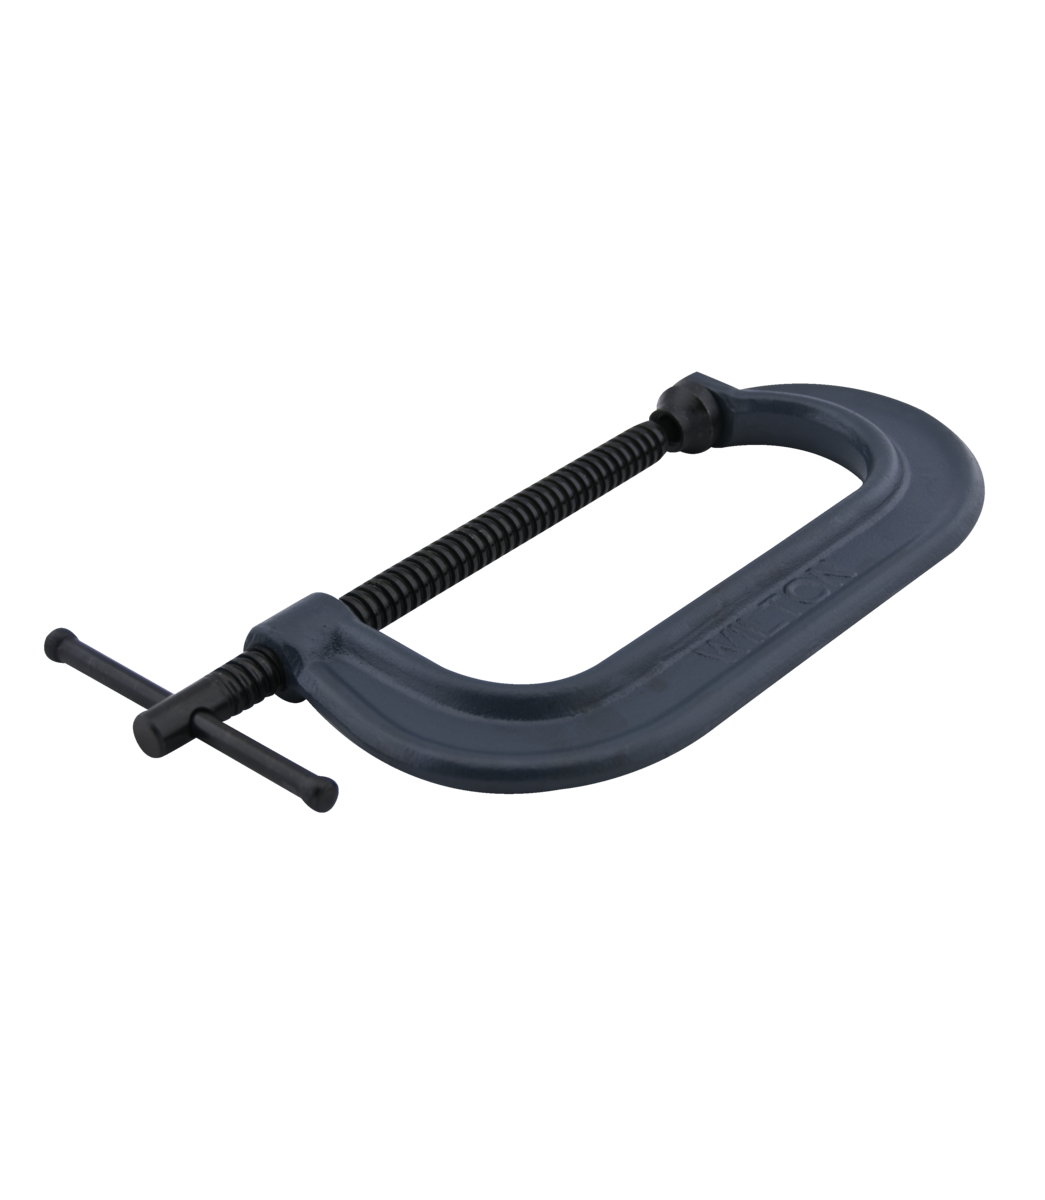 WILTON 800 Series Standard Depth Drop Forged C-Clamp, 1-1/8 -12” Opening, 3-7/8” Throat